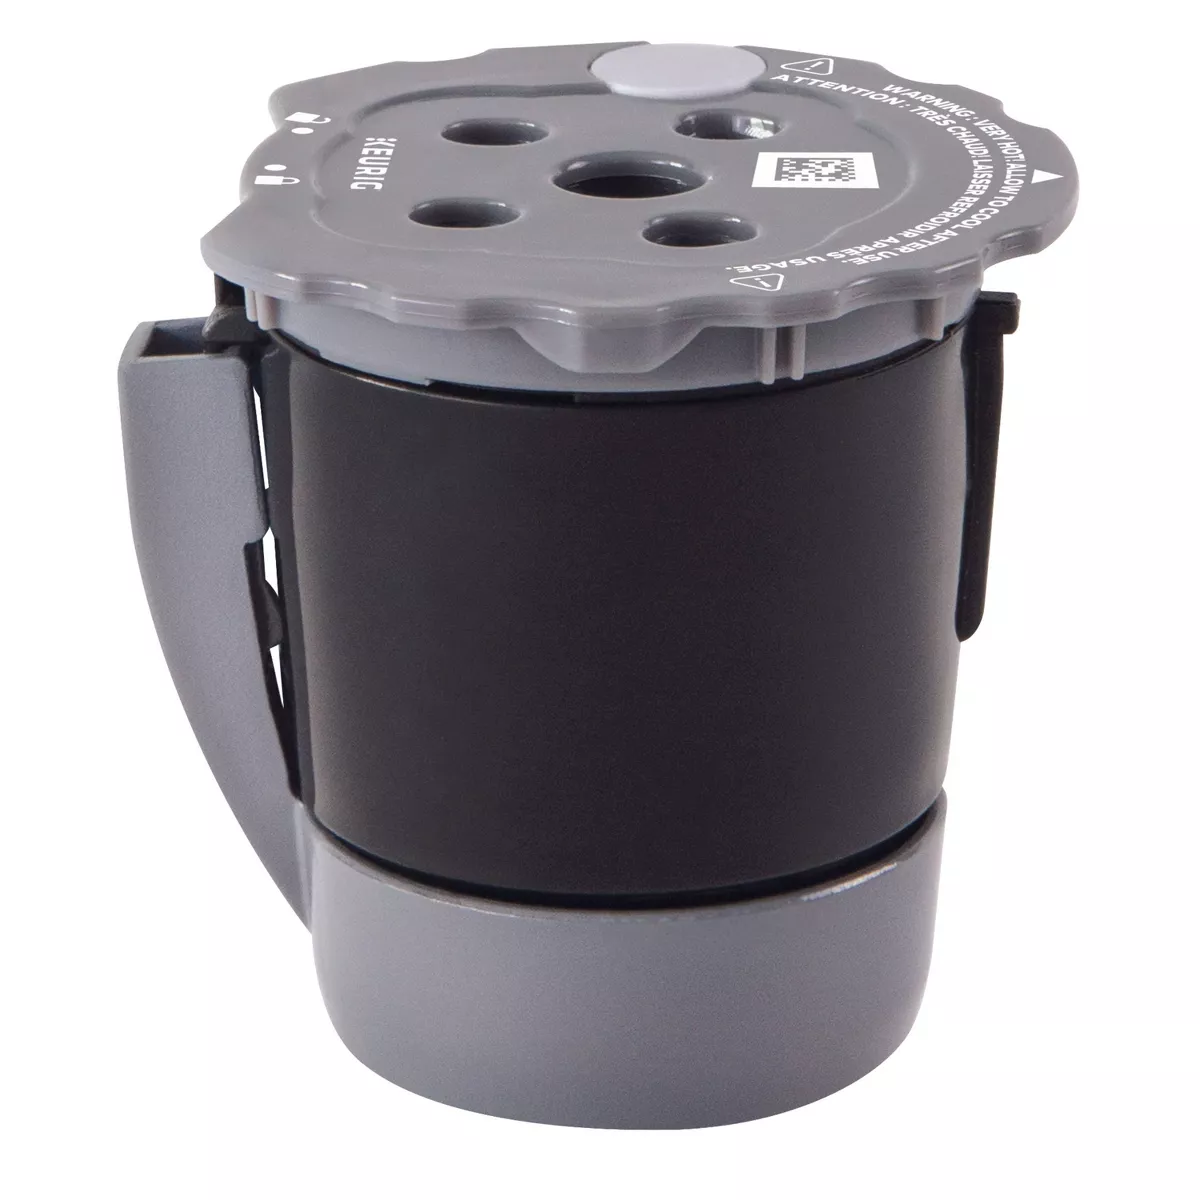 Experience versatility with Keurig's My K-Cup Universal Reusable Filter in black.